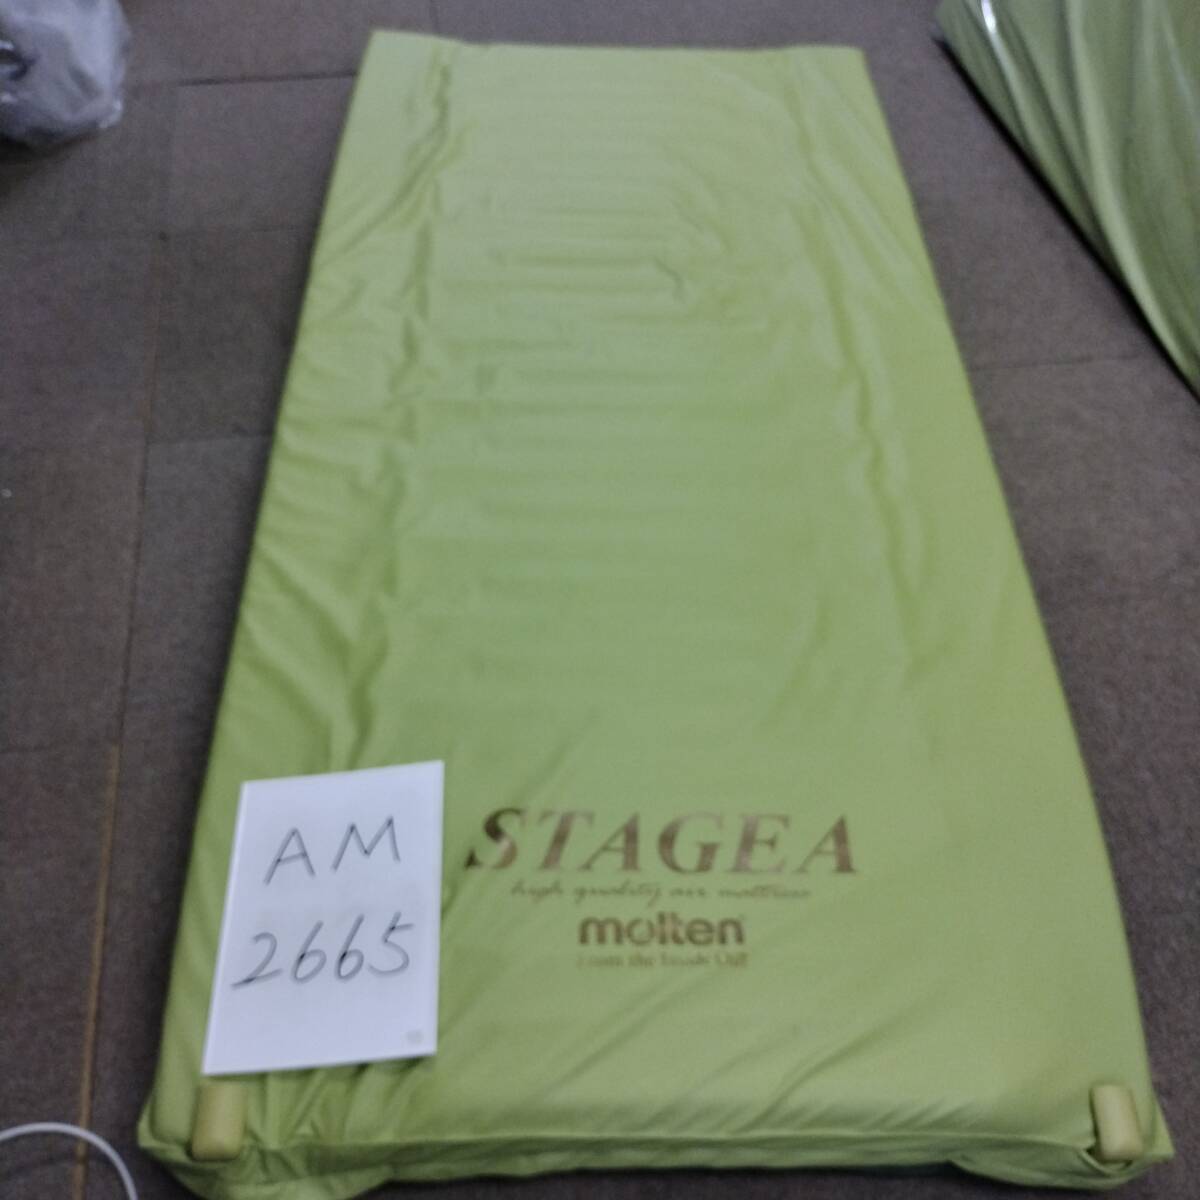 (AM-2665) with translation * stock disposal special price![ used air mattress ]moru ton Stagea MSTA91 disinfection washing ending nursing articles 